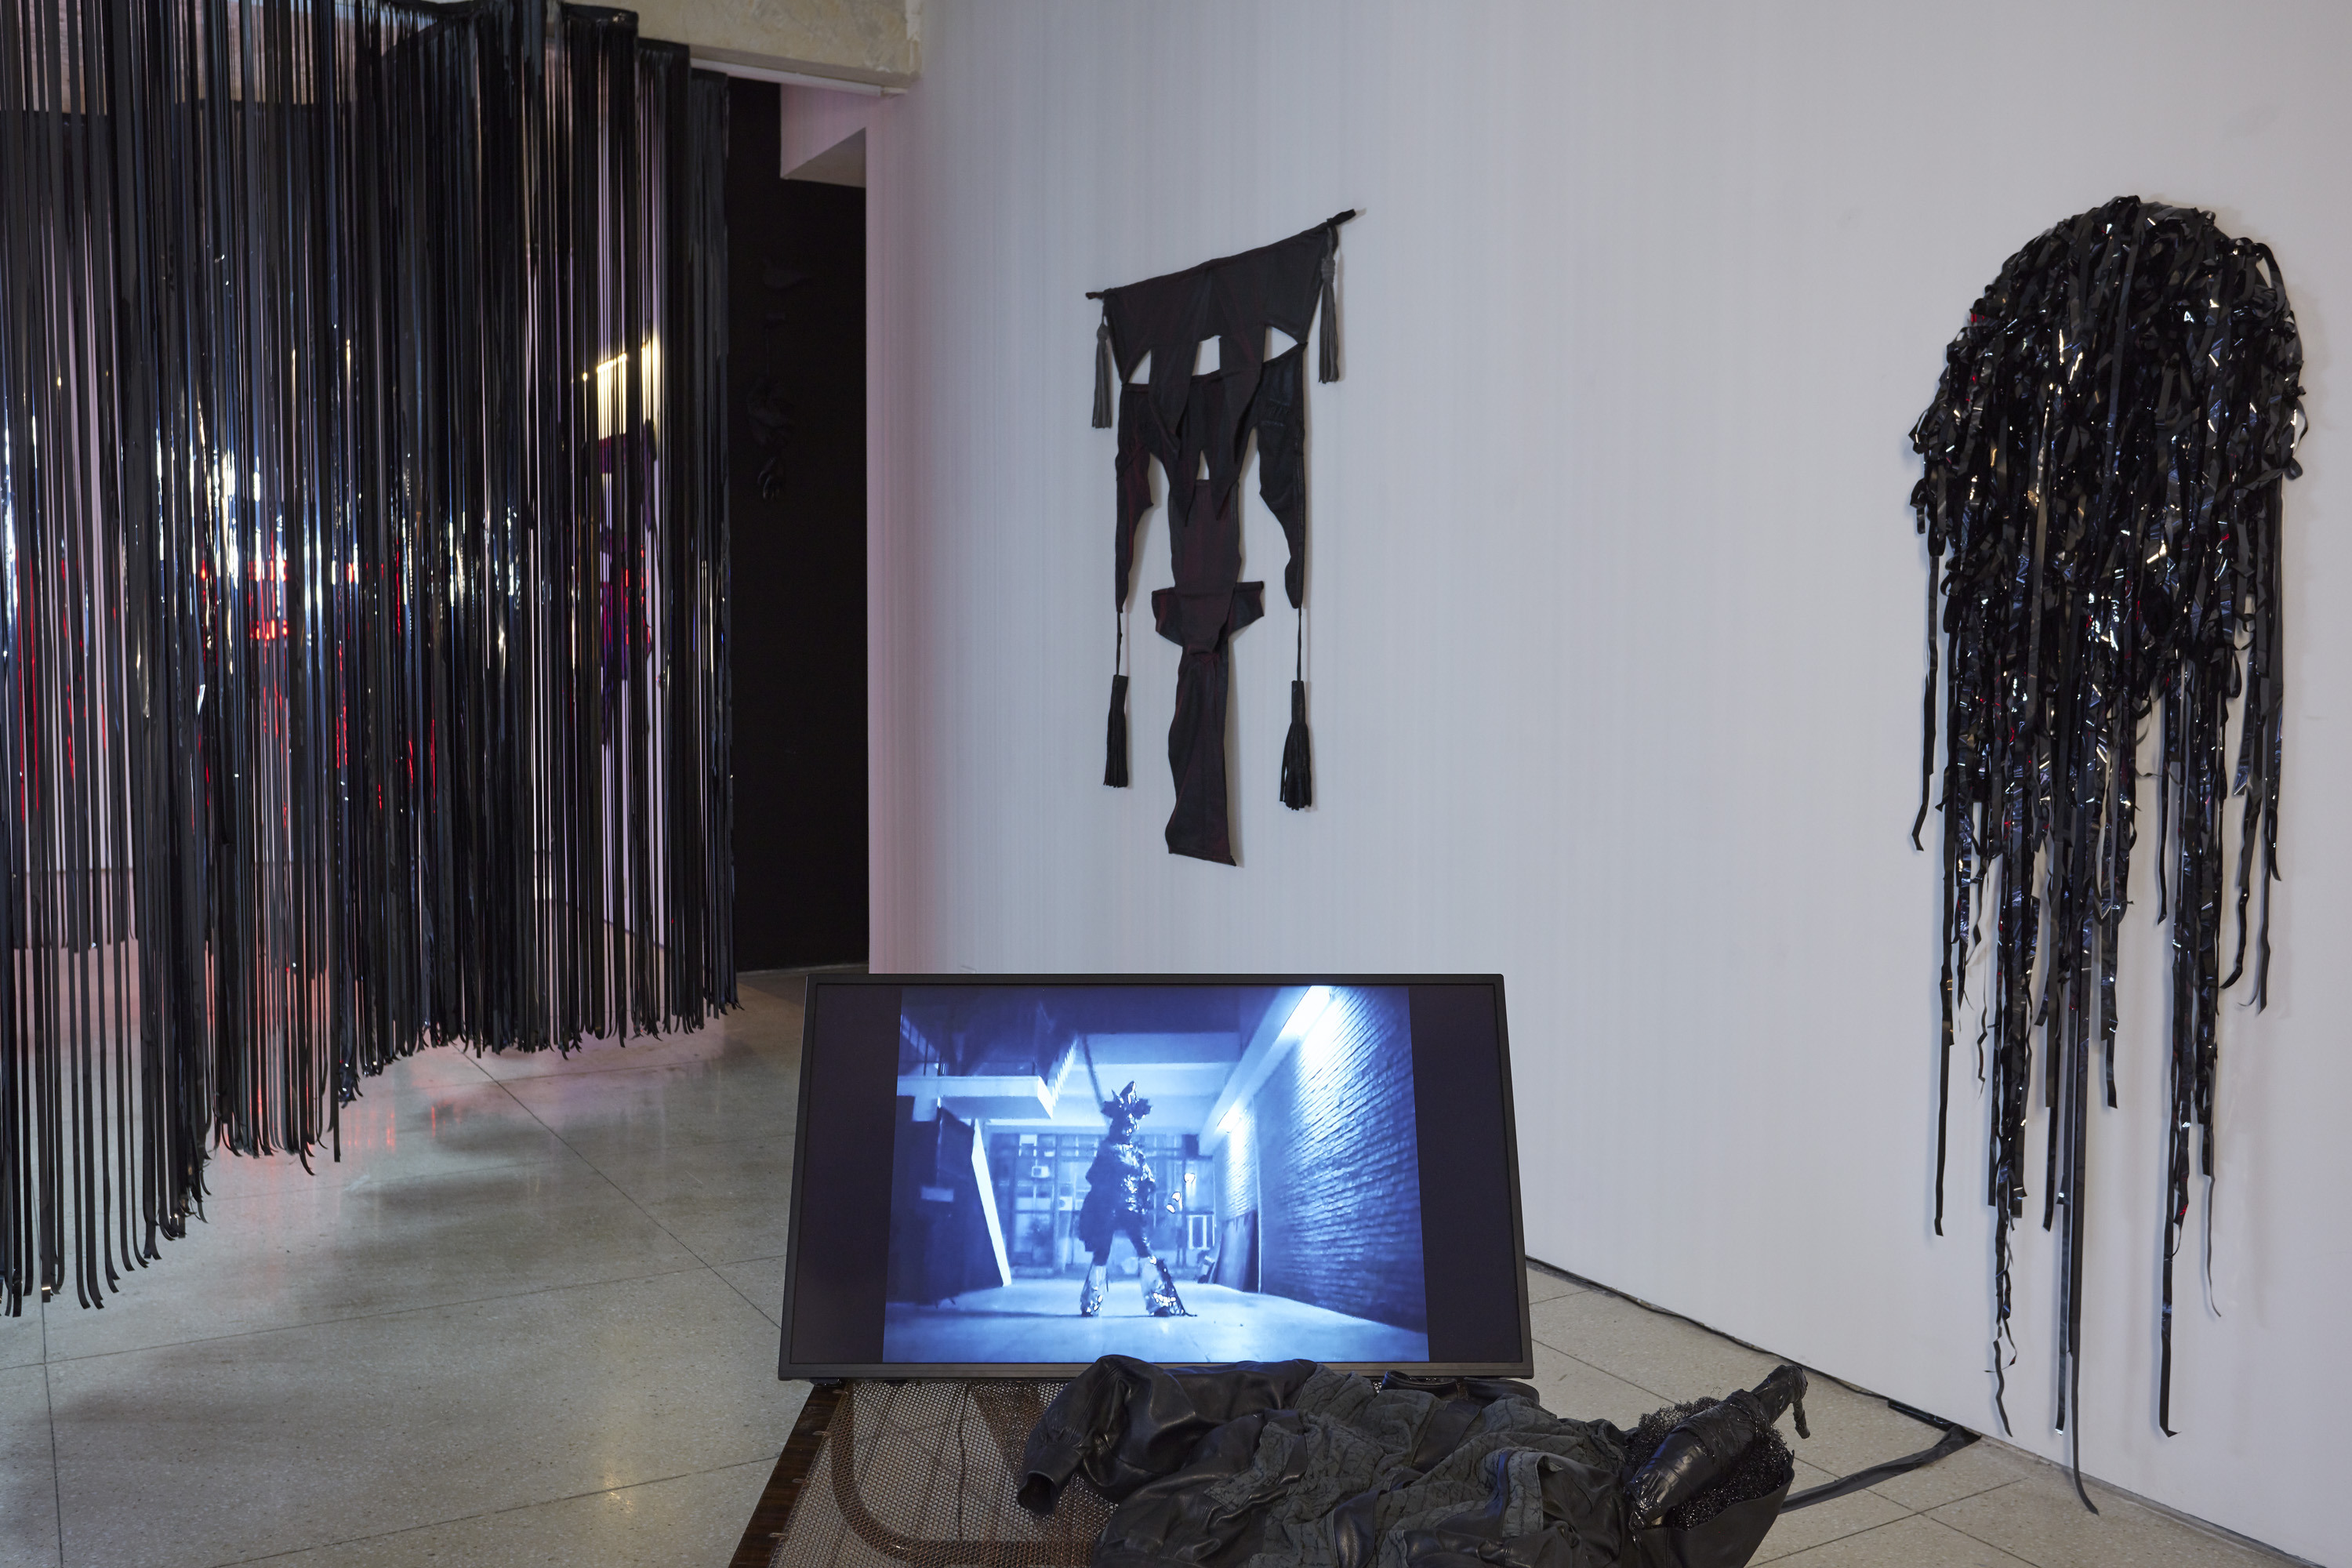 2. exhibition view w “The Owls Are Not What They Seem” (curtain), “SEX TAPE VIII”, “Banner 11:11”, “Black Mirror 003” (from left to right), photo: Mihaela Vezentan